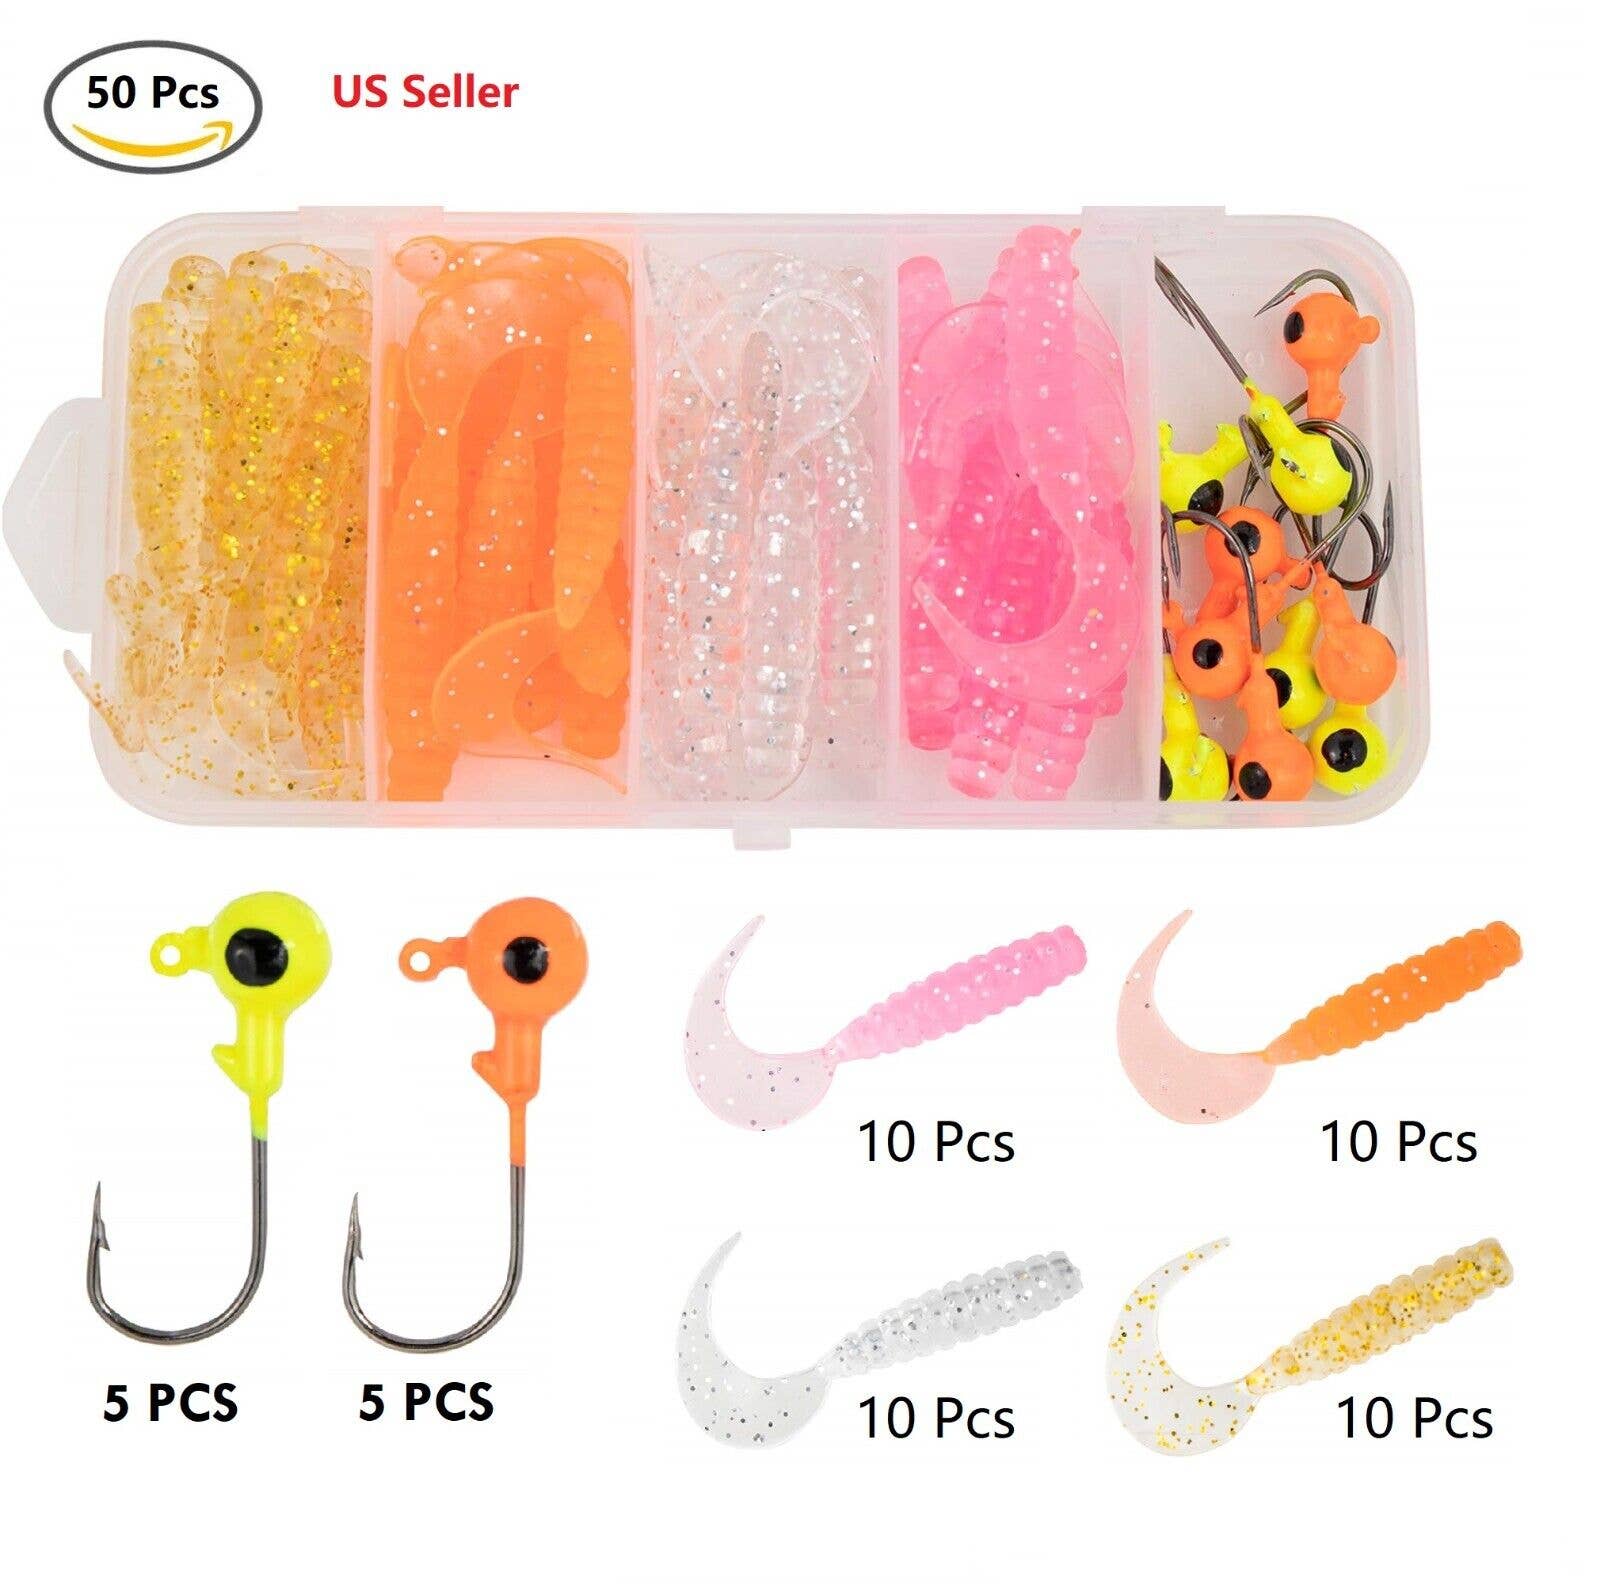 Purchase Wholesale fishing lures. Free Returns & Net 60 Terms on Faire